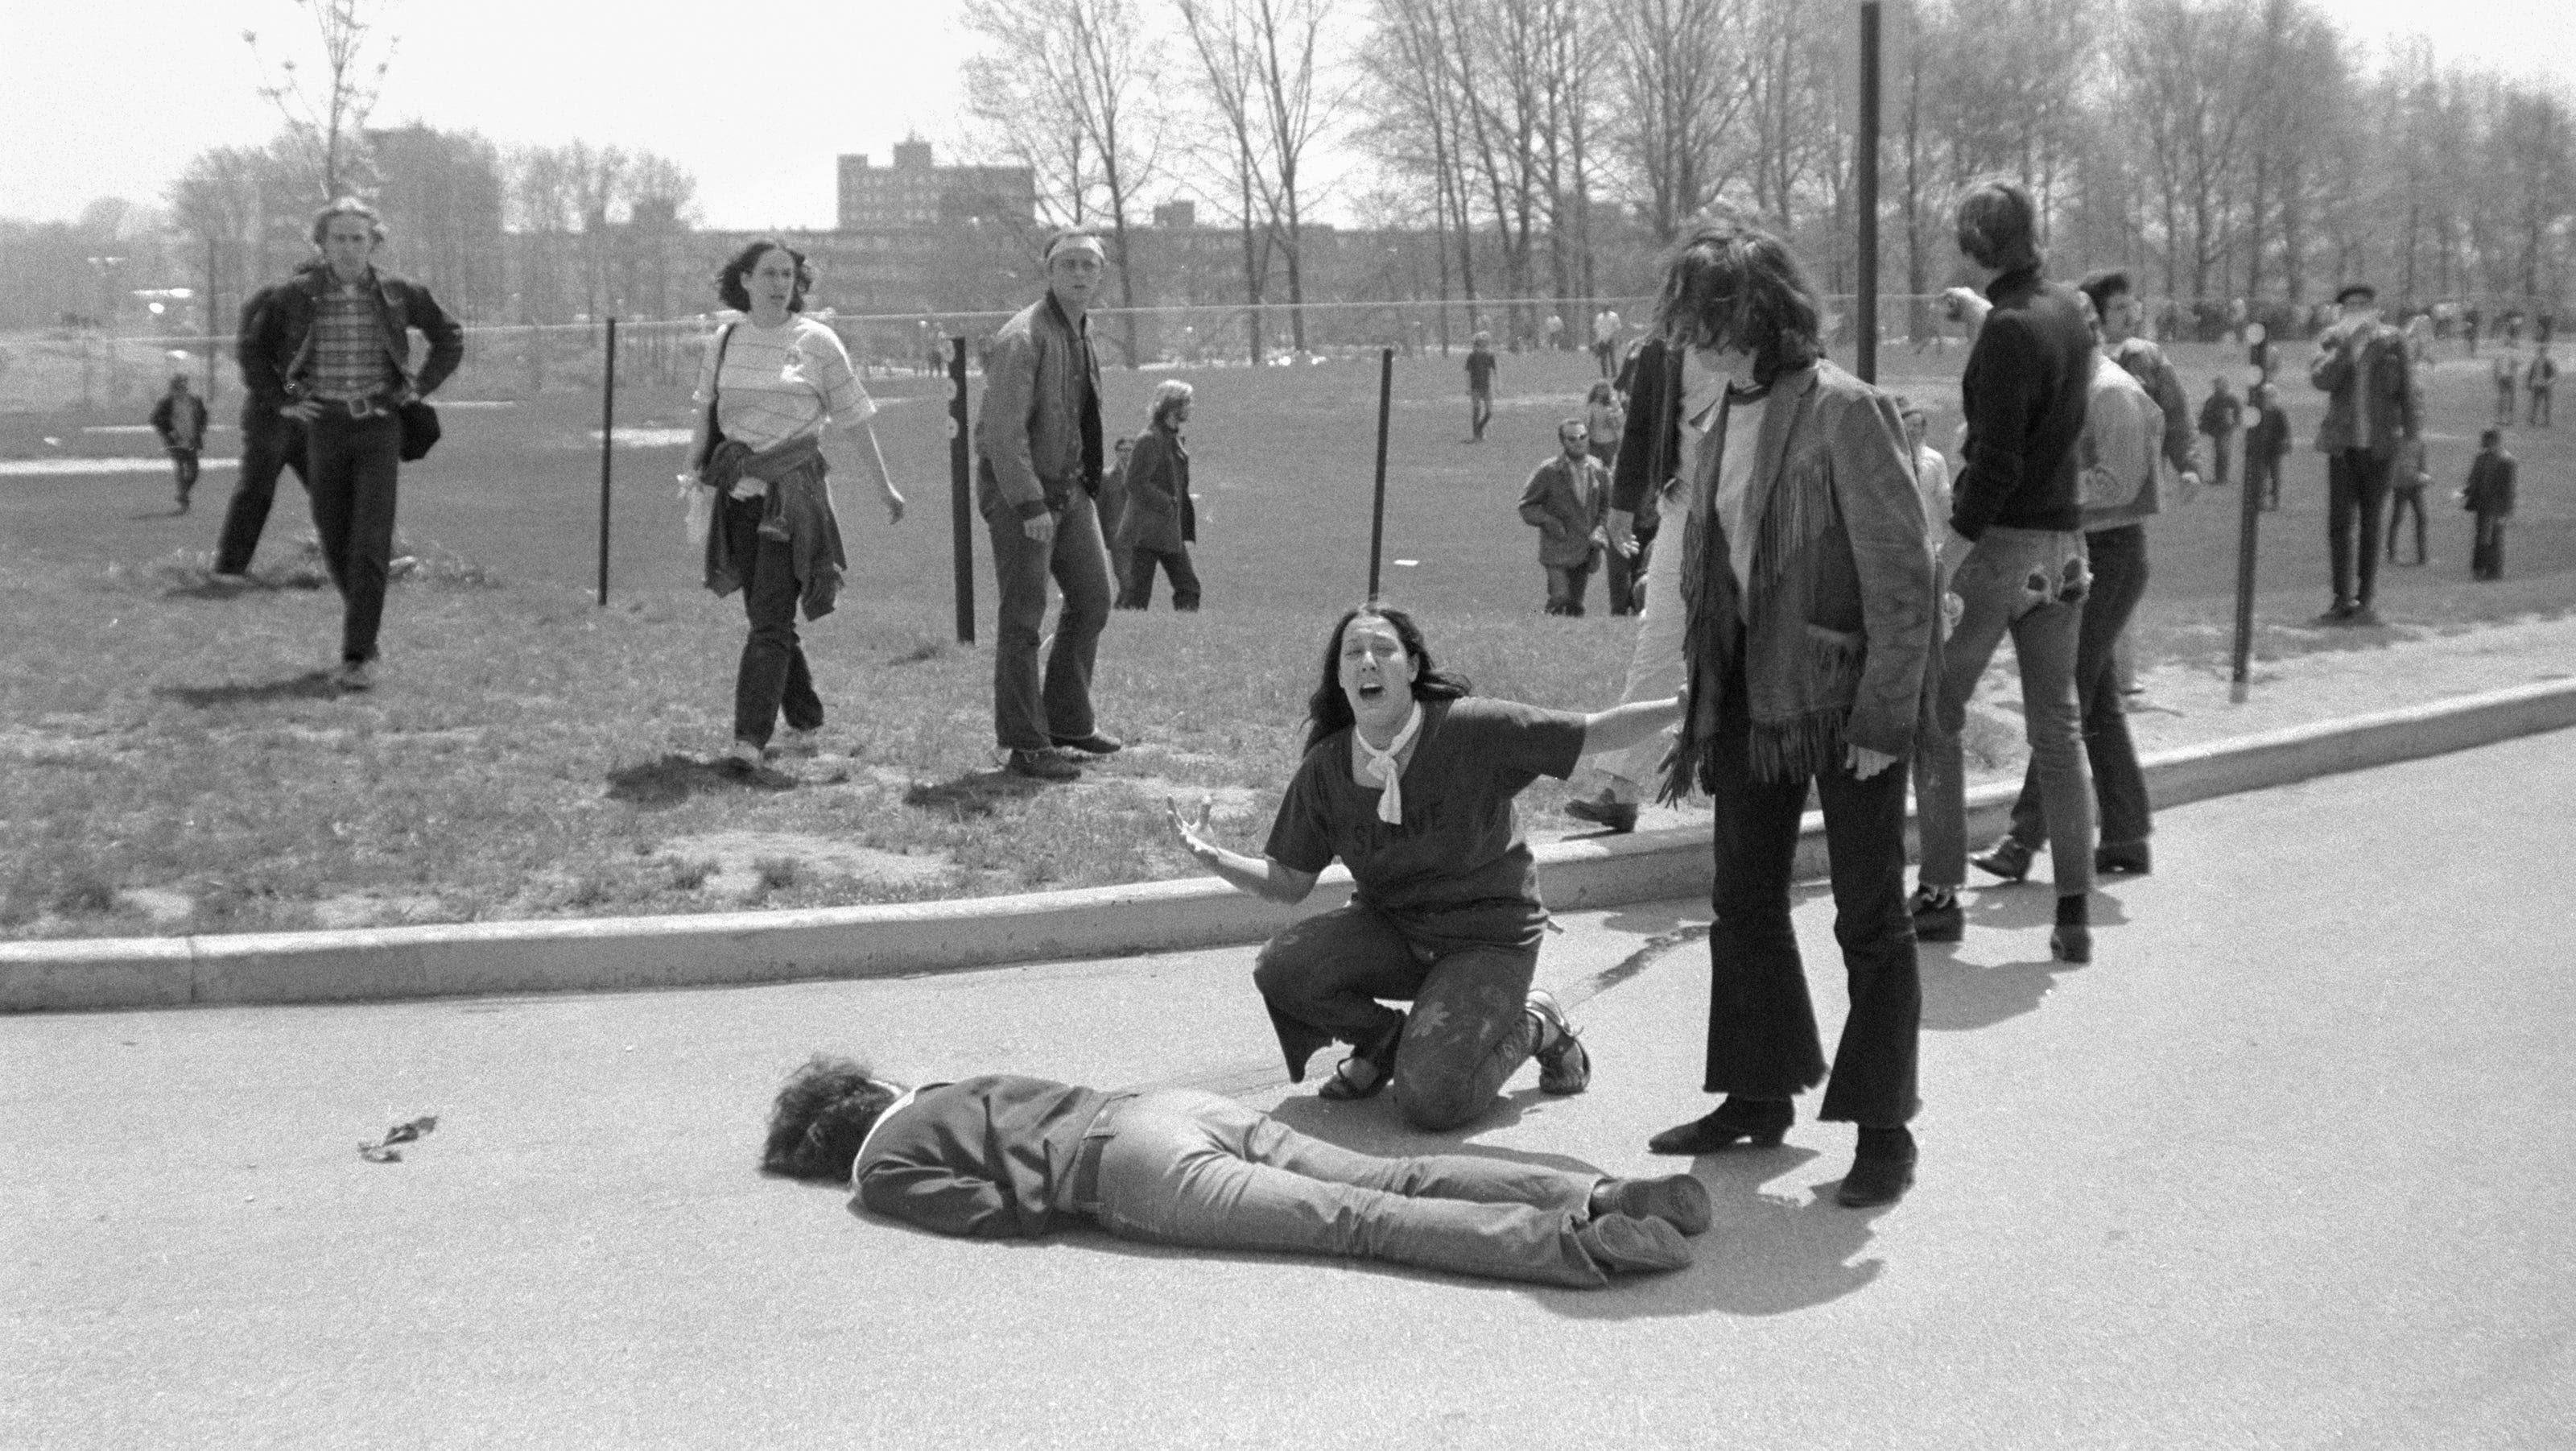 'Utter turmoil': Former National Guardsman reflects on Kent State tragedy of May 4, 1970